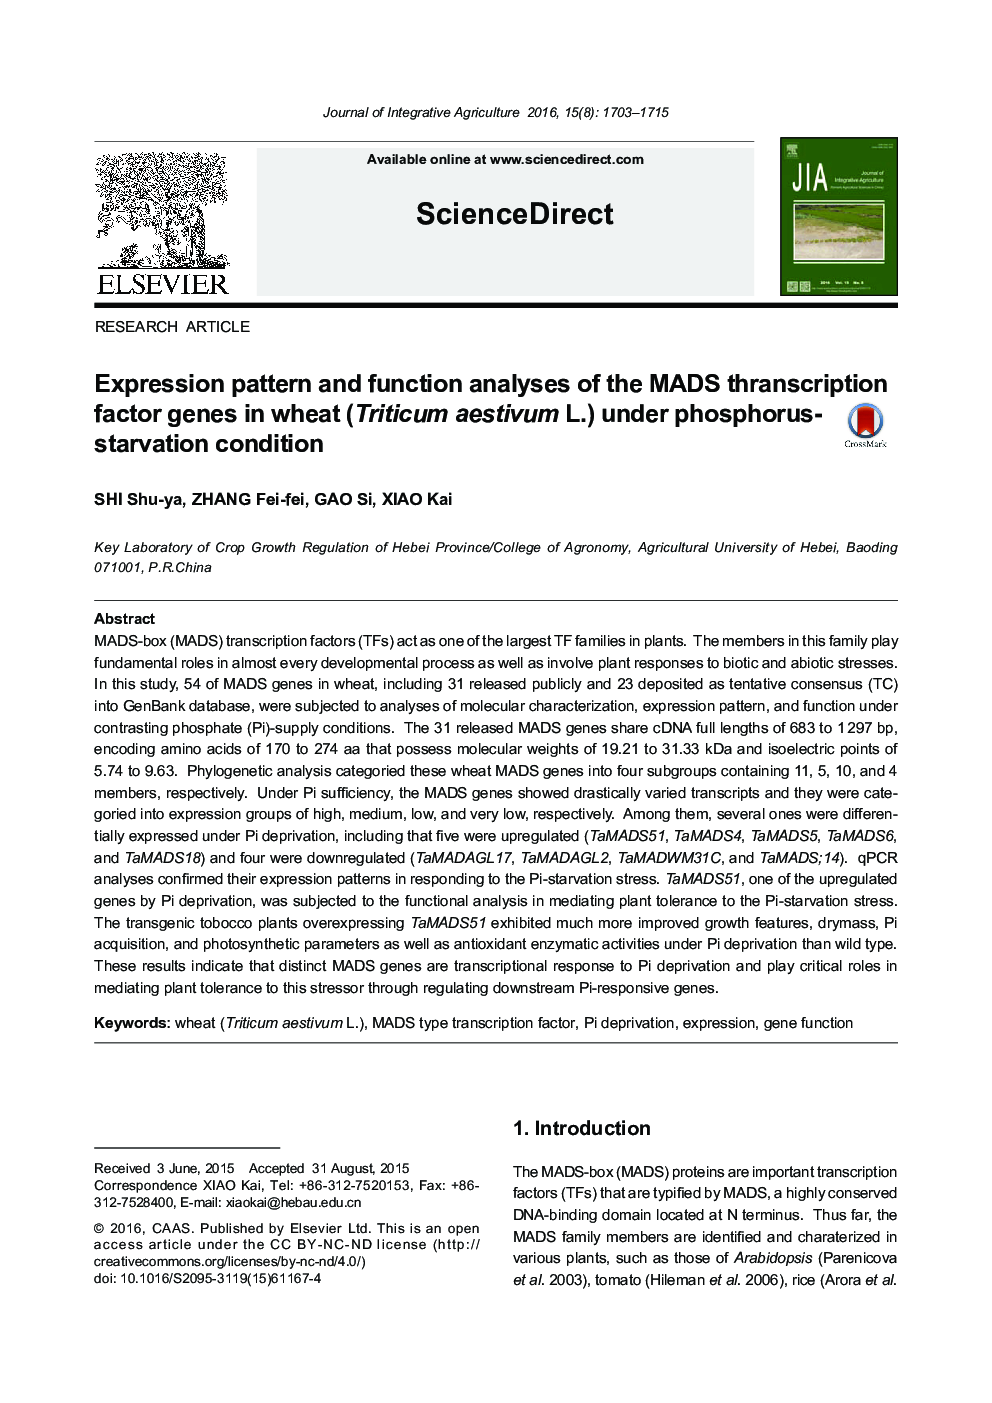 Expression pattern and function analyses of the MADS thranscription factor genes in wheat (Triticum aestivum L.) under phosphorus-starvation condition